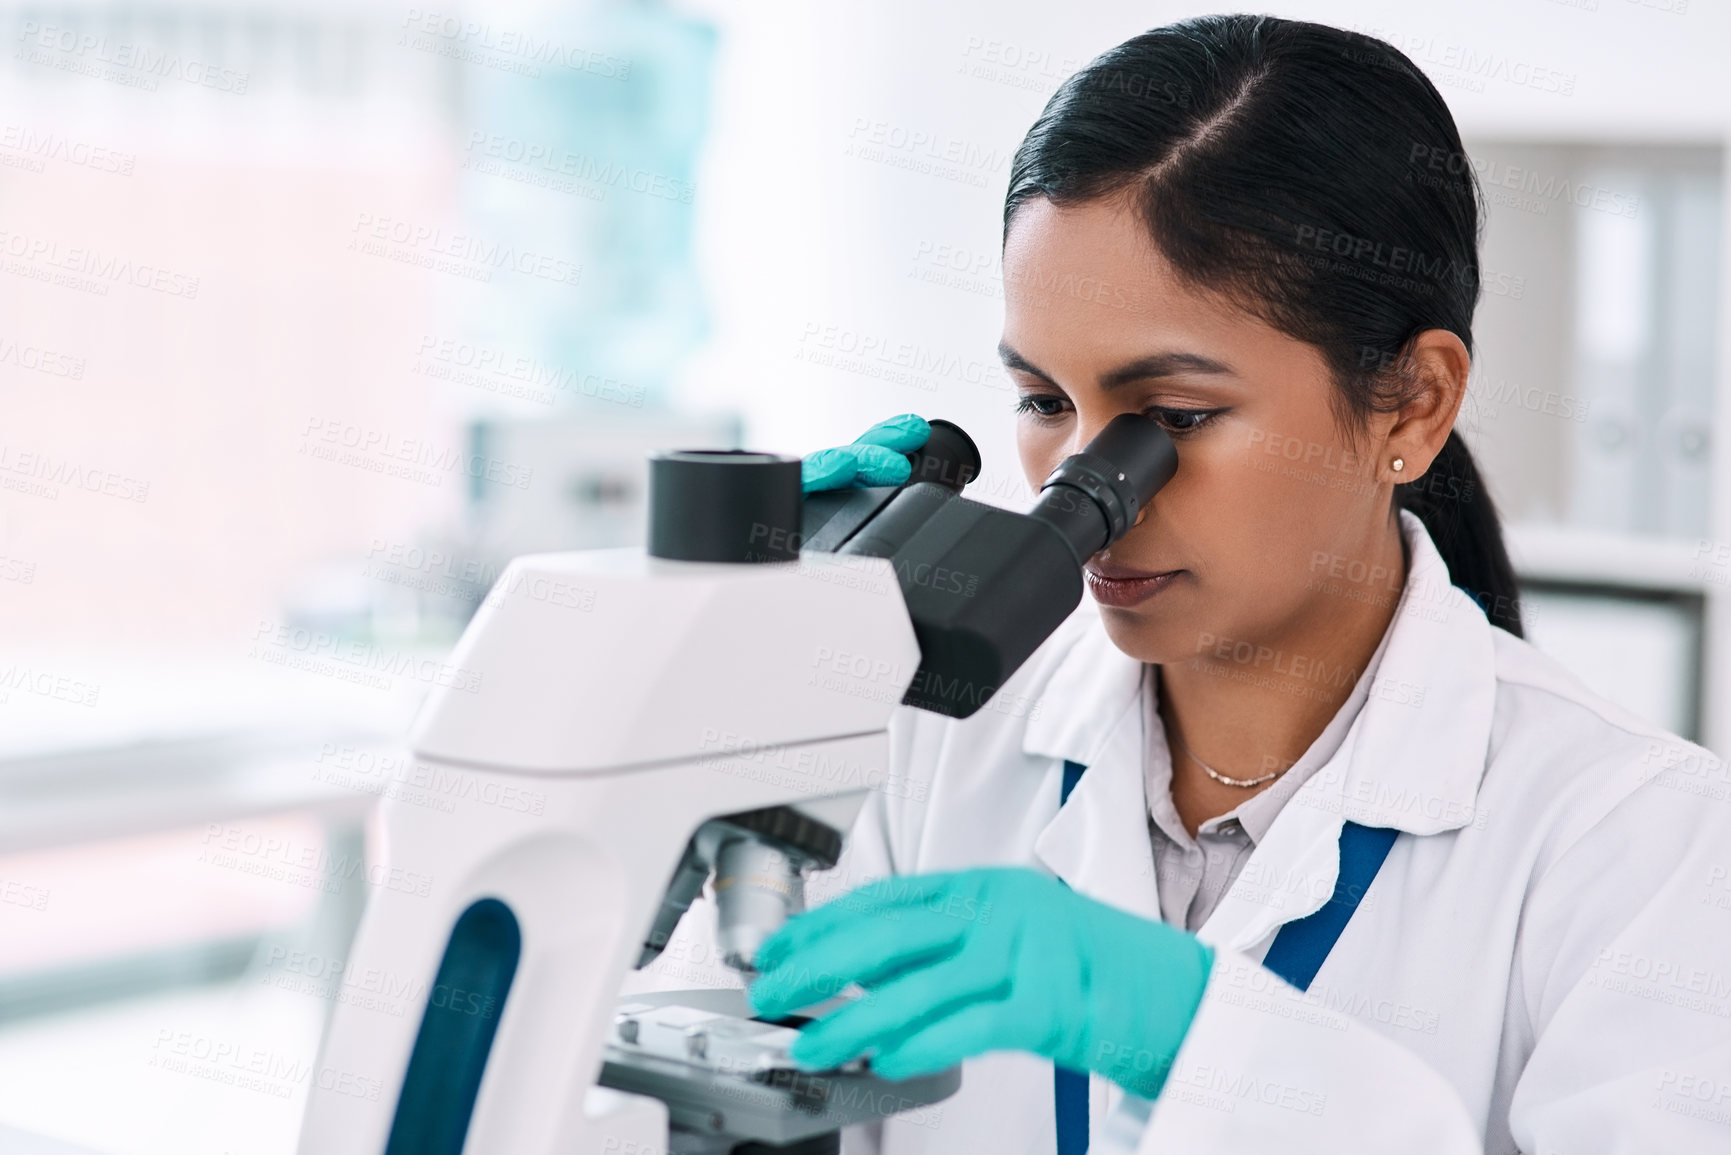 Buy stock photo Cropped shot of an attractive young female scientist looking through a microscope while working in a laboratory